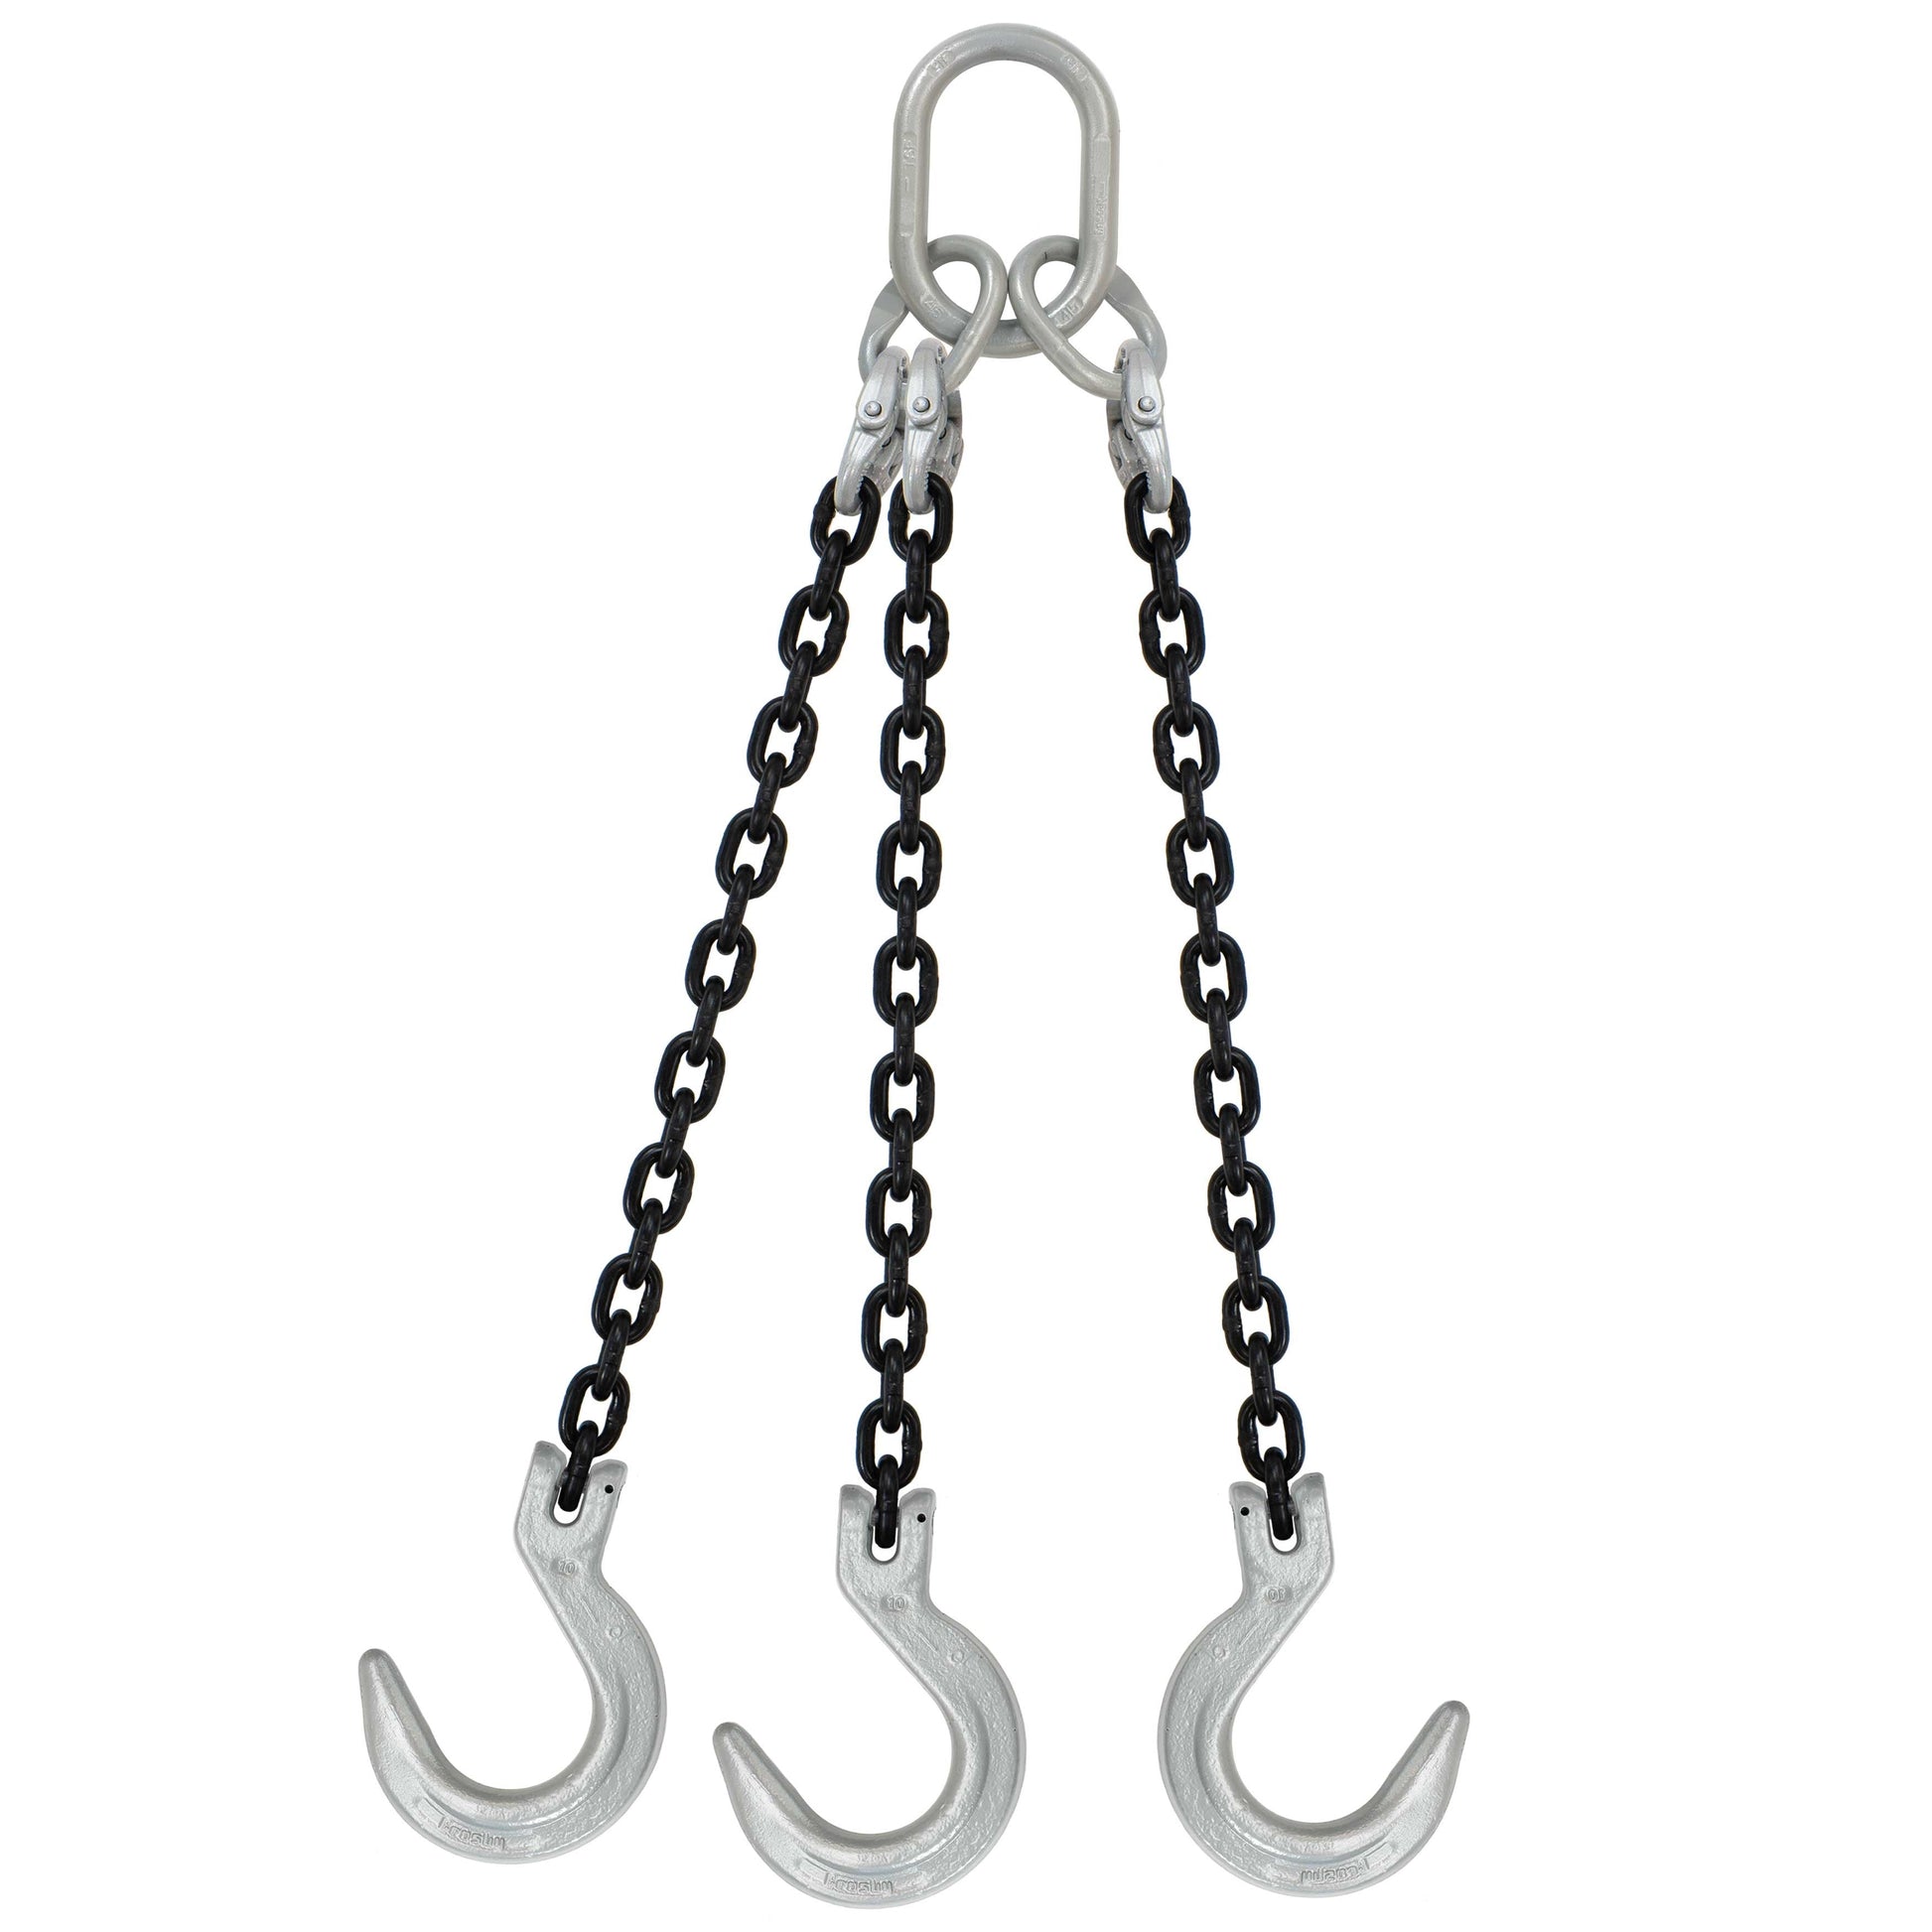 12 inch x 4 foot Domestic 3 Leg Chain Sling w Crosby Foundry Hooks Grade 100 image 1 of 2